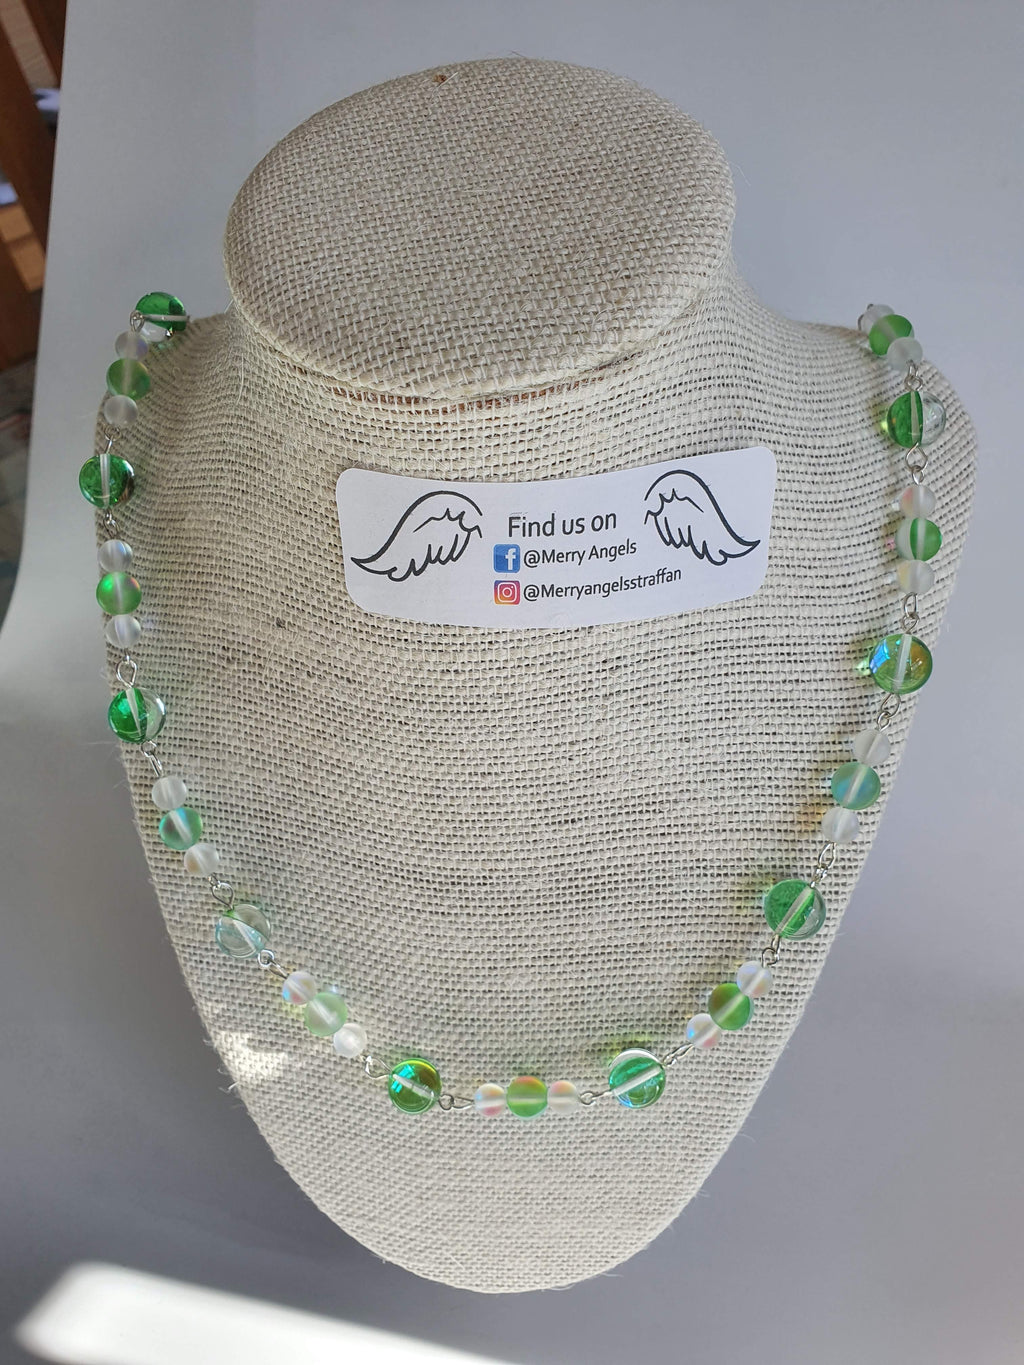 This is a picture of a beautiful green and clear necklace